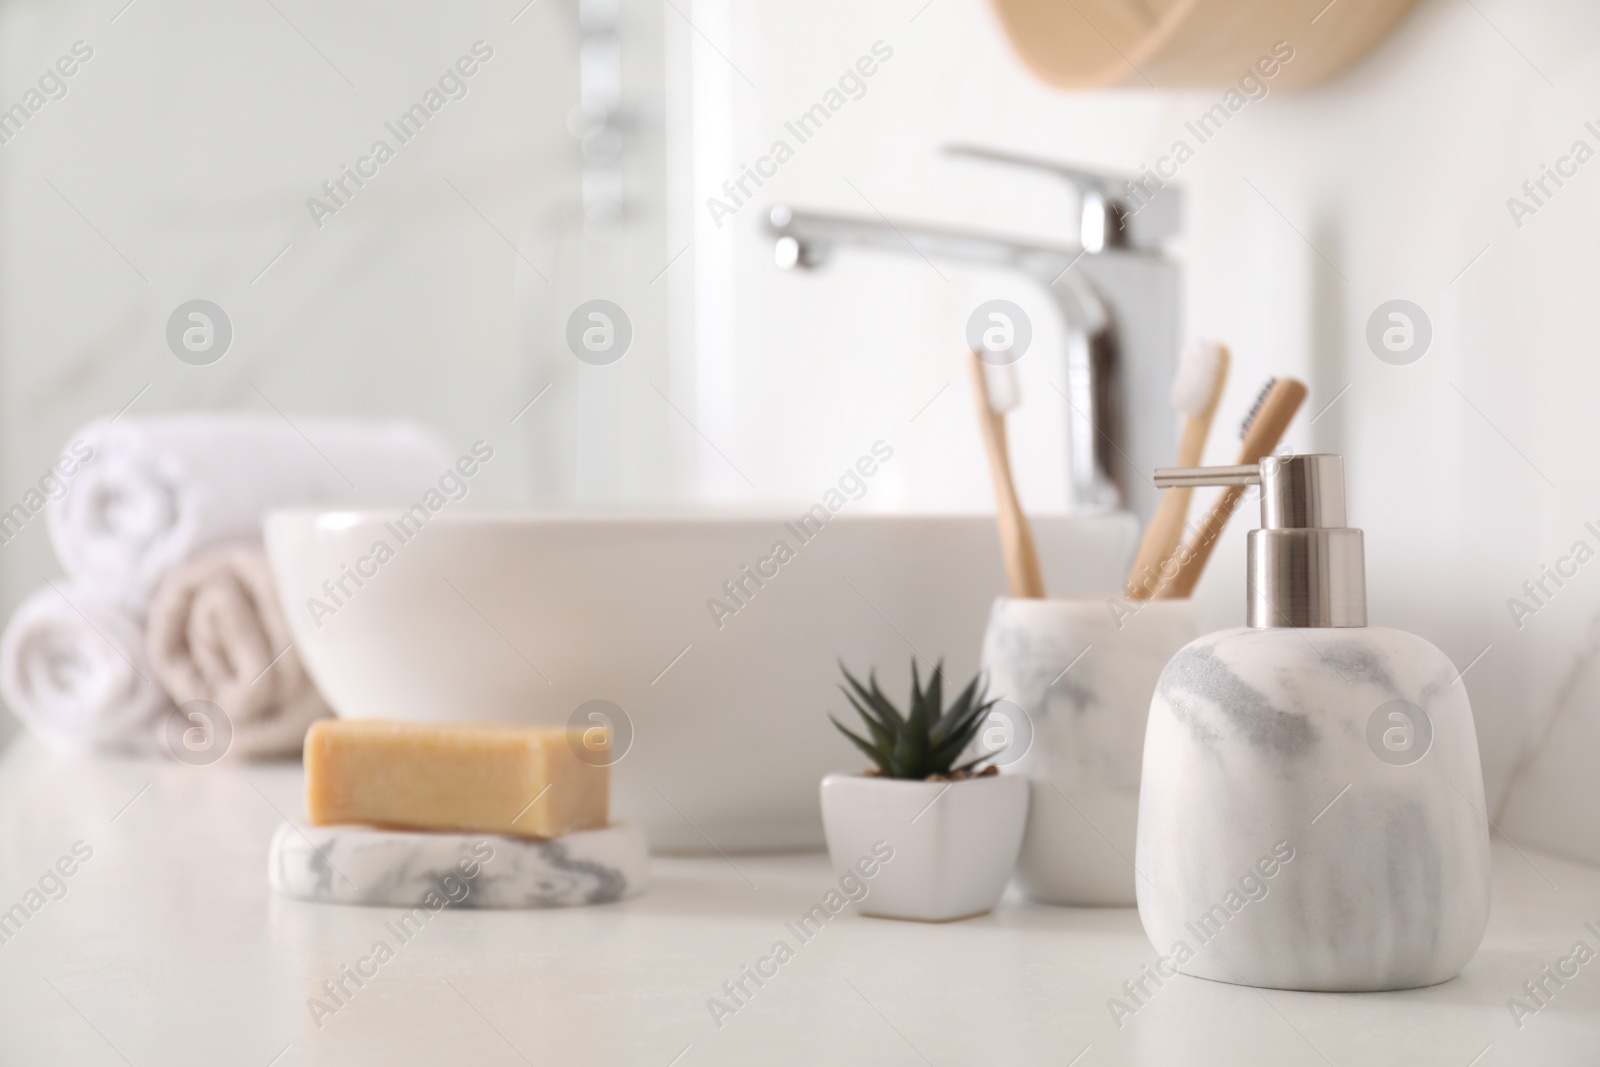 Photo of Holder with toothbrushes, plant and different toiletries near vessel sink in bathroom